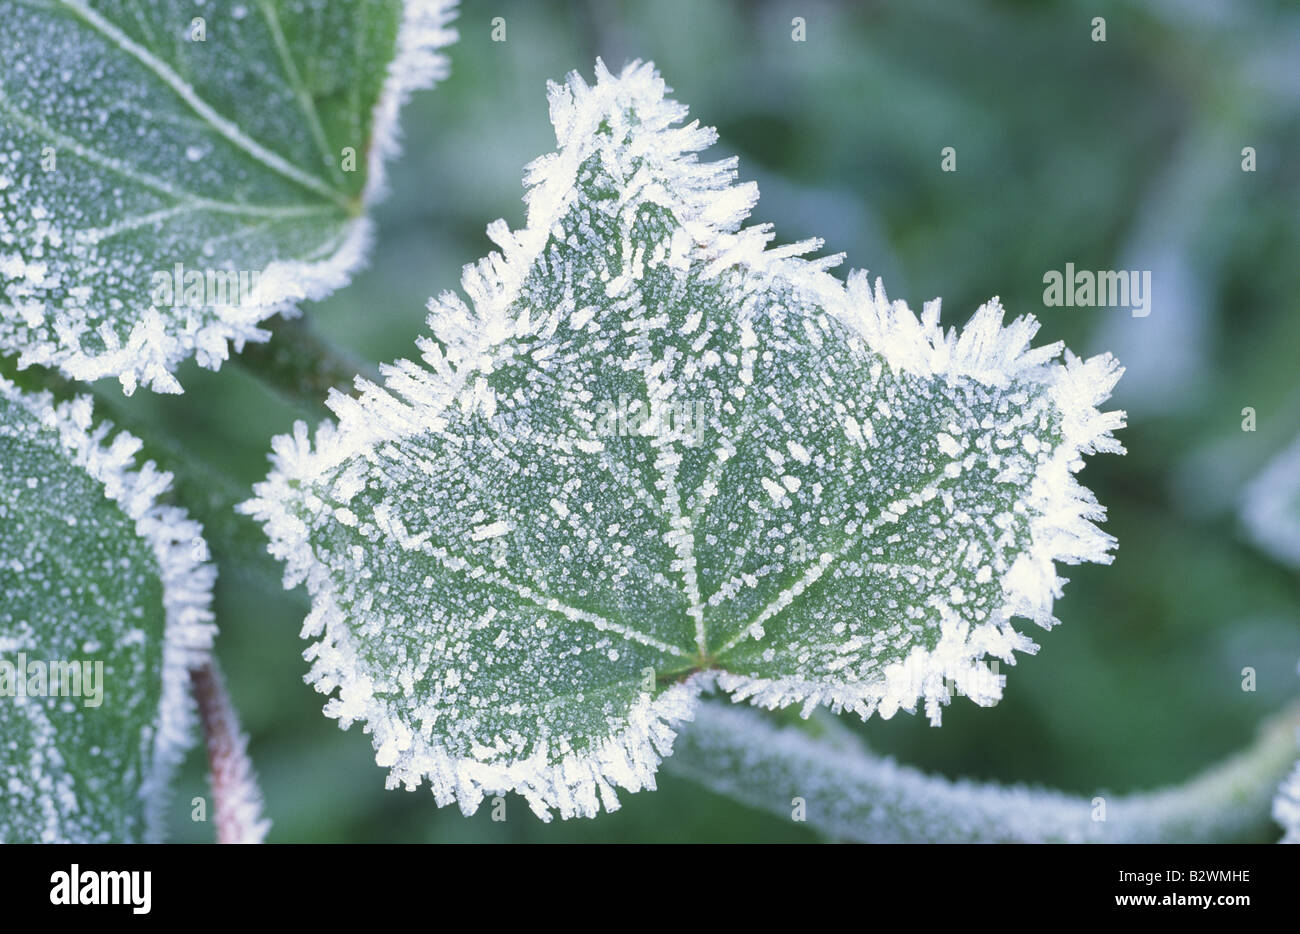 Frosted Ivy Leaf Stock Photo